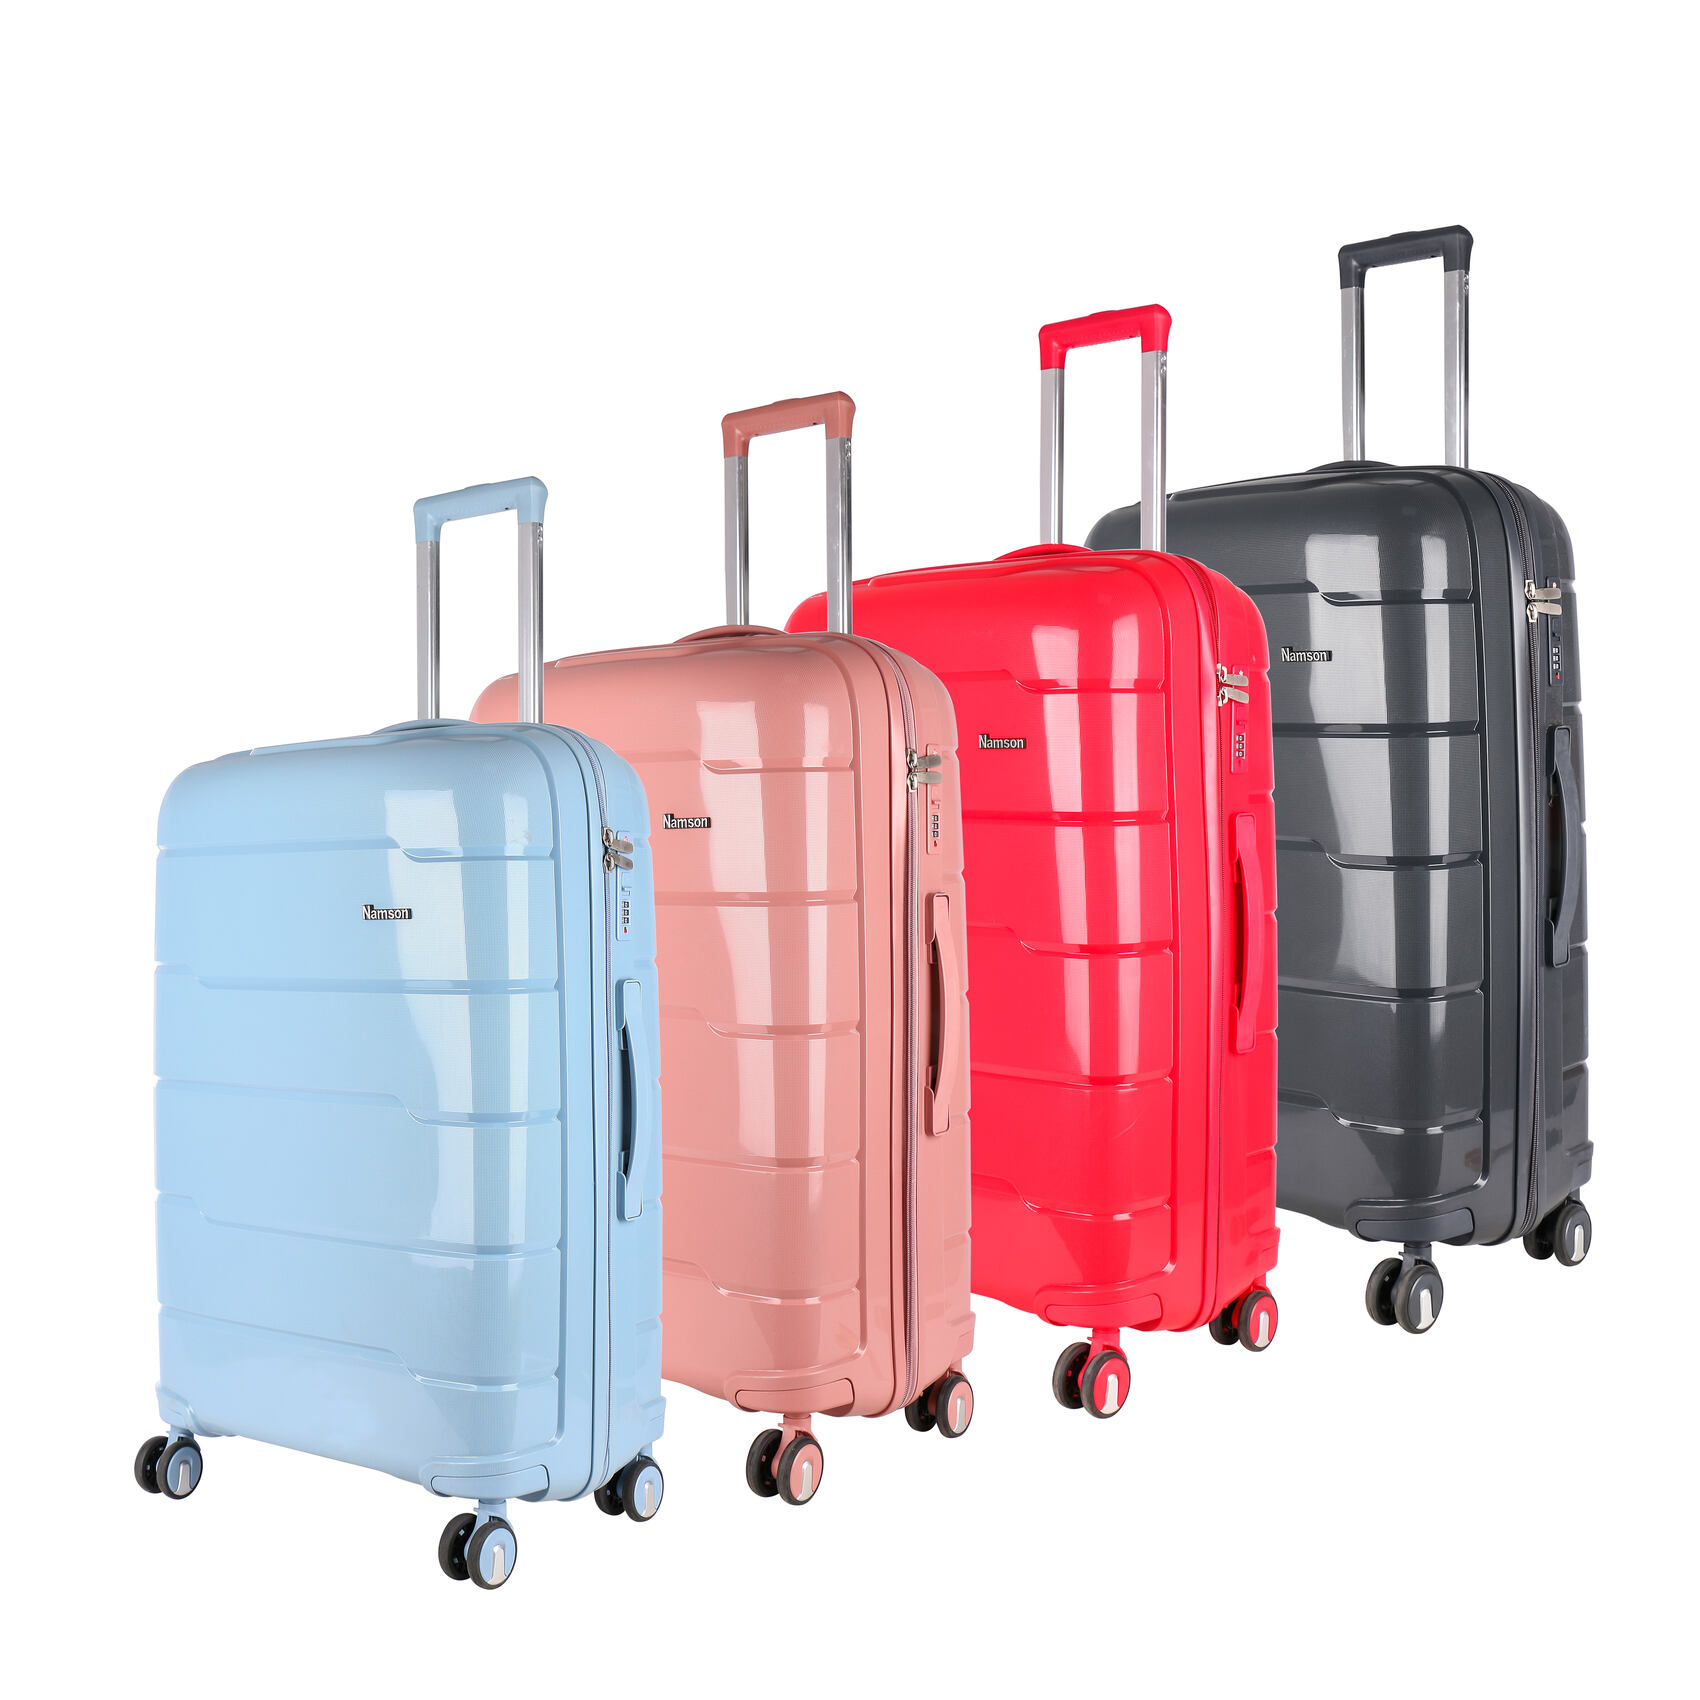 NAMSON 28 inch LUGGAGE TROLLEY SUITCASE 93L | 20 - 30 kg WITH TELESCOPIC HANDLE NA-7872-28 | LIGHT WEIGHT WATER RESISTANT | PREMIUM QUALITY | FLEXIBLE | 360 SPINNING 8 WHEELS | NON BREAKABLE | DOUBLE ZIPPER | MULTIPLE LOCKING SYSTEM